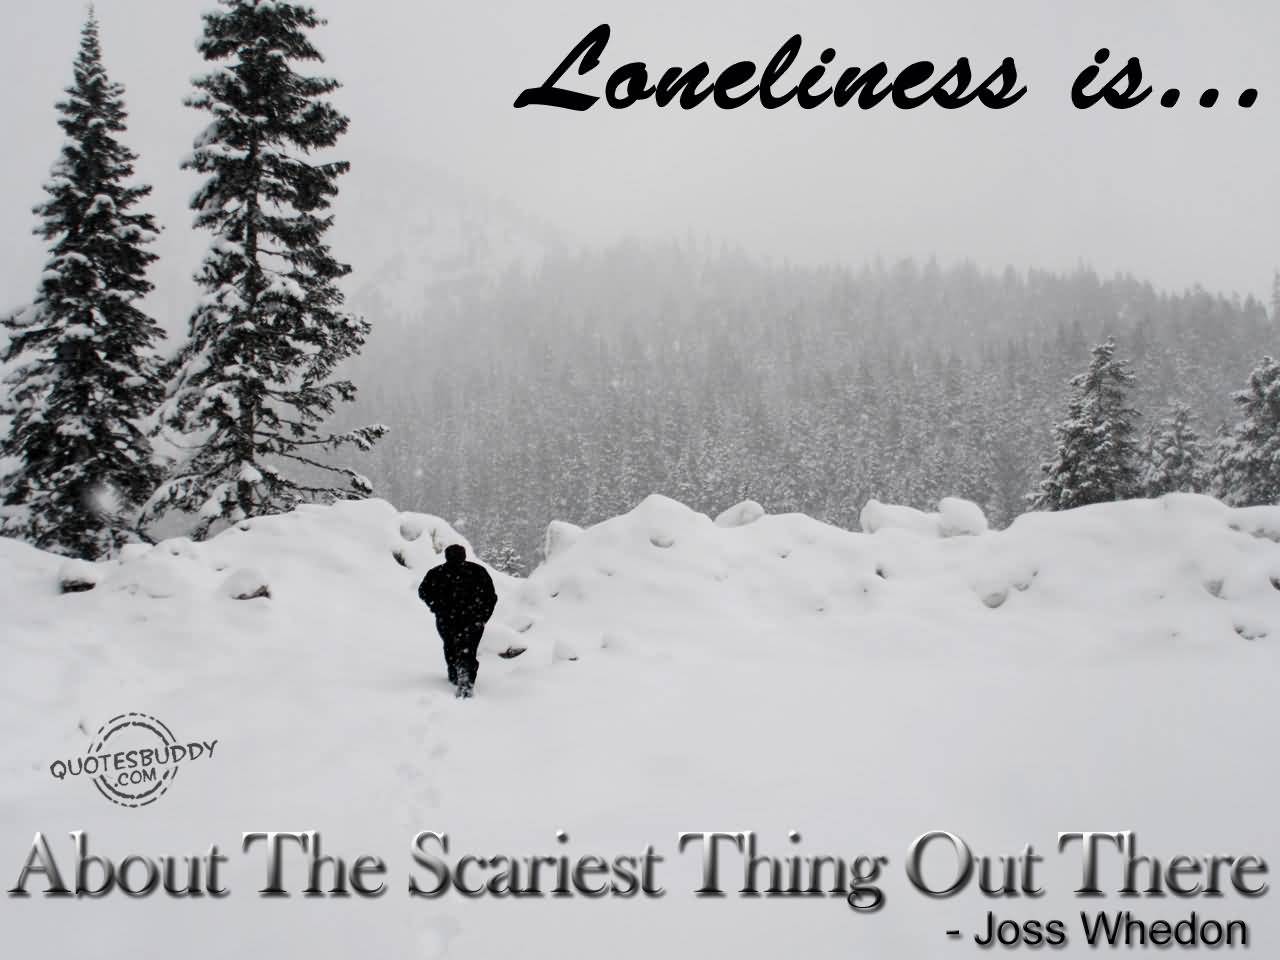 Loneliness is about the scariest thing out there. Joss Whedon